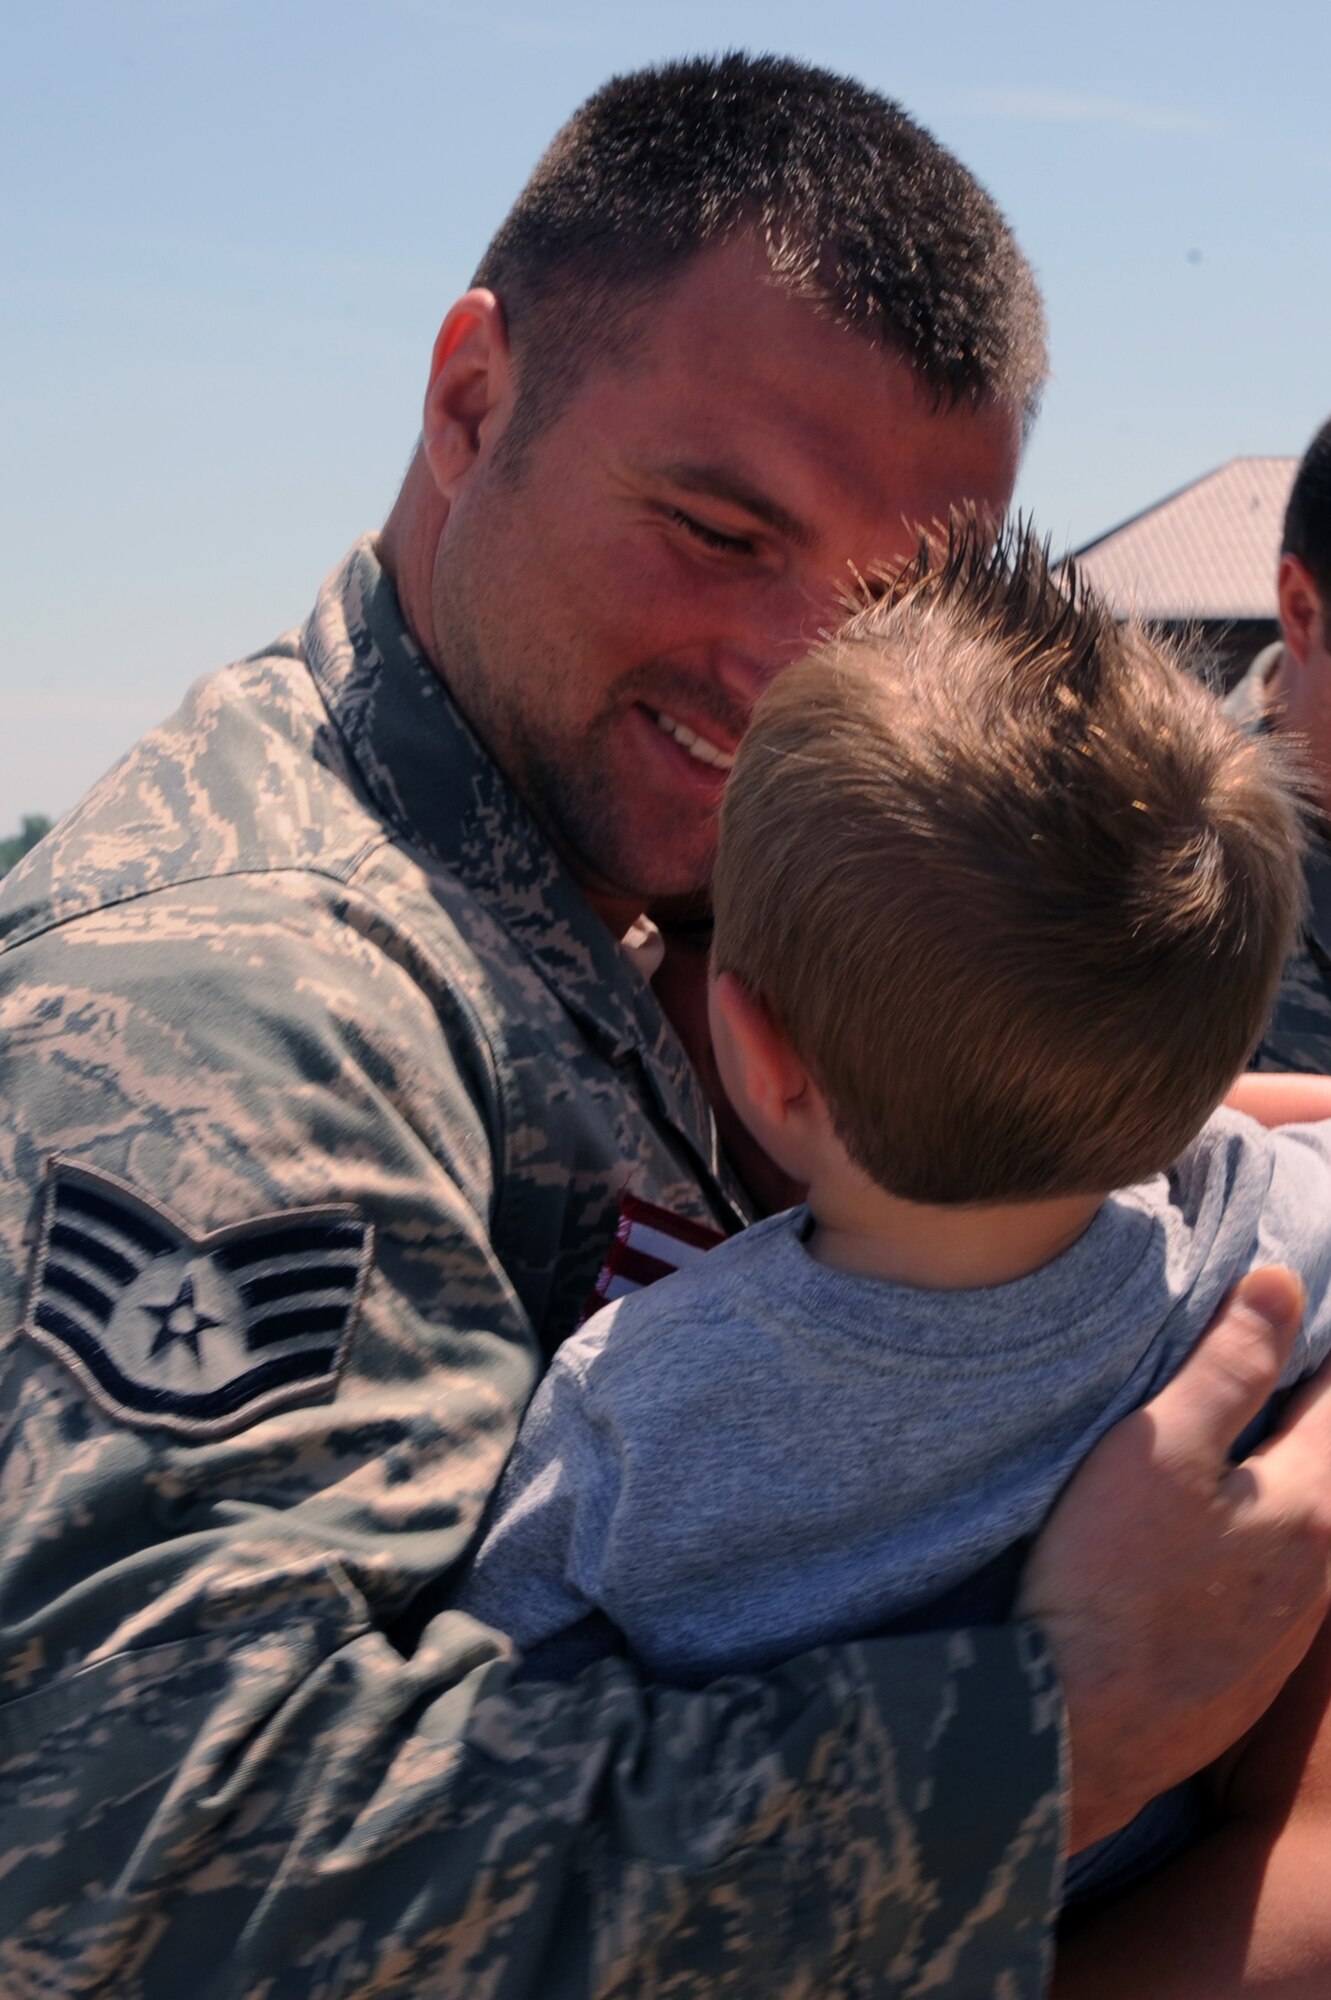 WHITEMAN AIR FORCE BASE, Mo., -- Staff Sgt. Walter Coston, 509th Aircraft Maintenance Squadron, hugs his son CJ, June 4, upon returning home from his four-month deployment to Andersen Air Force Base, Guam. More than 200 Airmen deployed in support of the B-2 Spirit's continuing bomber presence in the Pacific.
(U.S. Air Force photo/Staff Sgt. Jason Huddleston)

